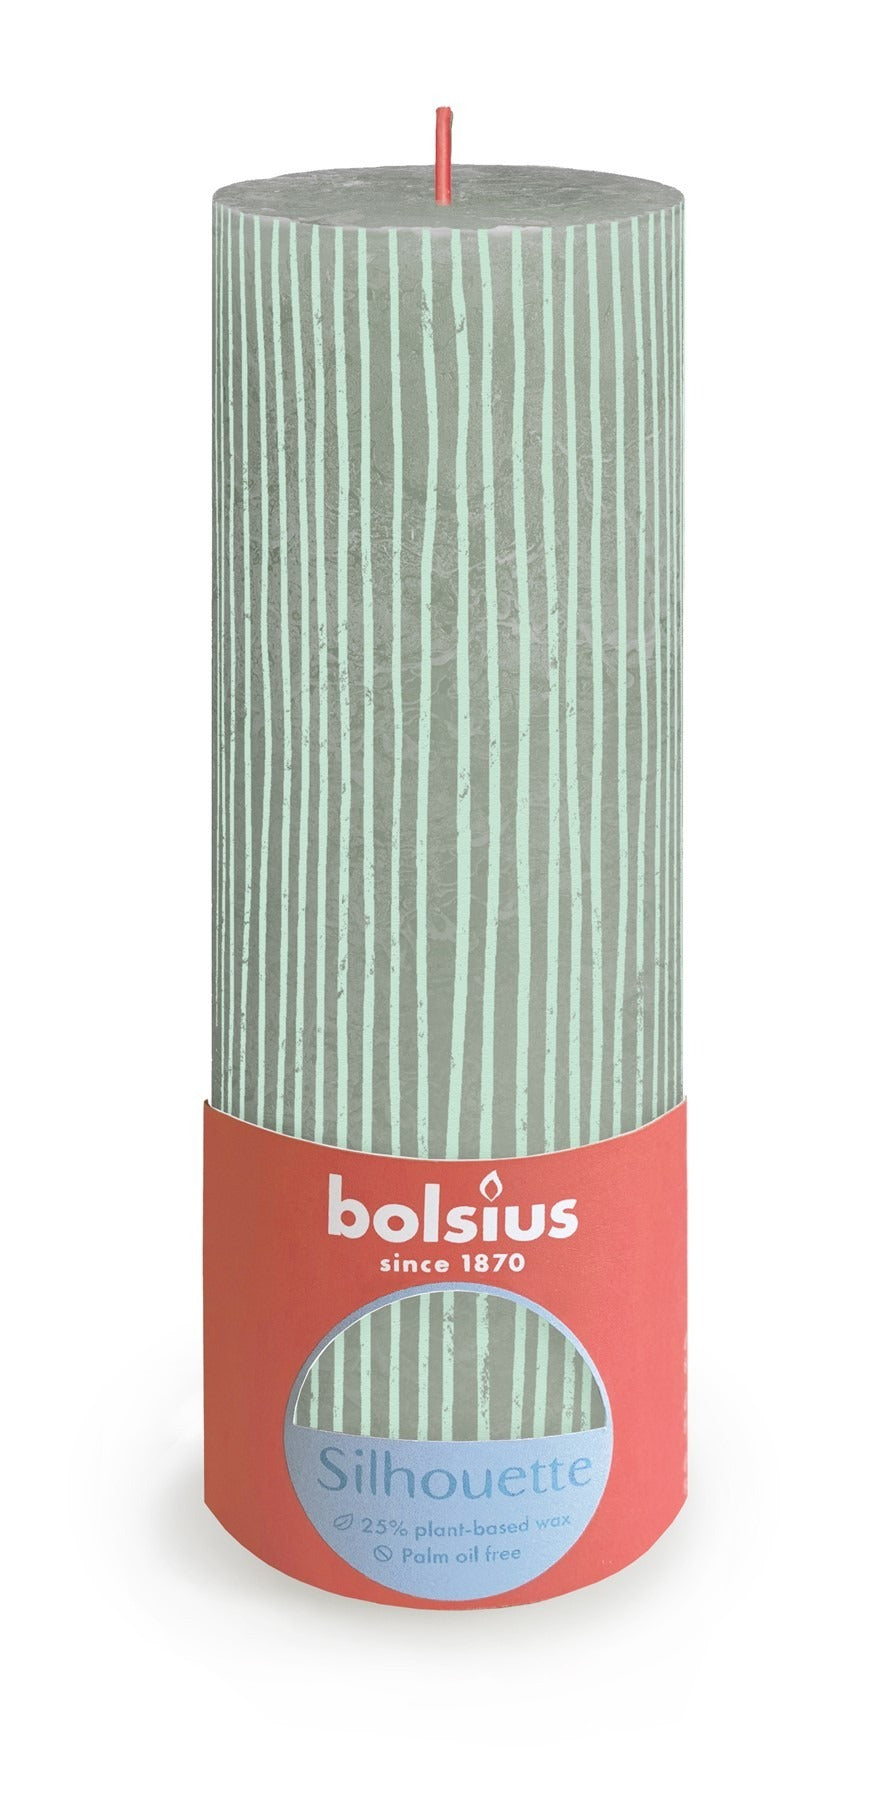 View Jade Green Bolsius Rustic Silhouette Pillar Candle 190 x 68mm information